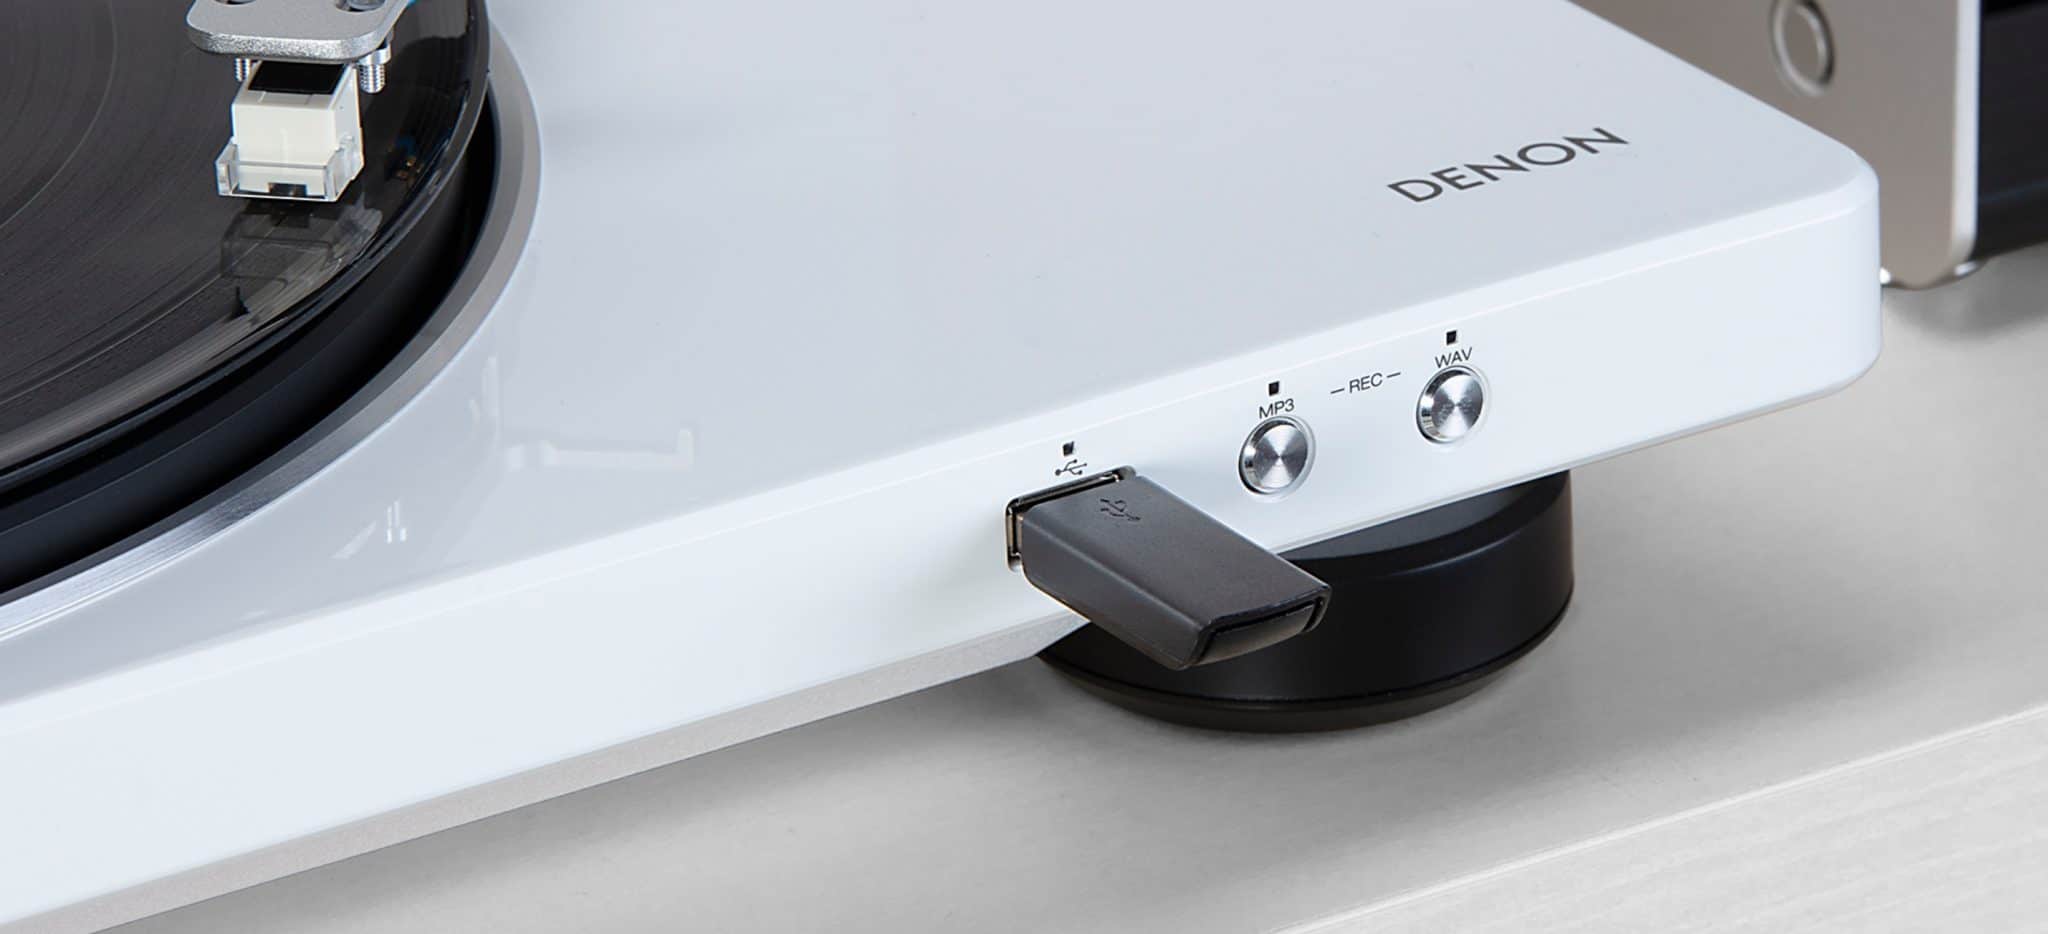 DP-400 and DP-450USB Turntables from Denon